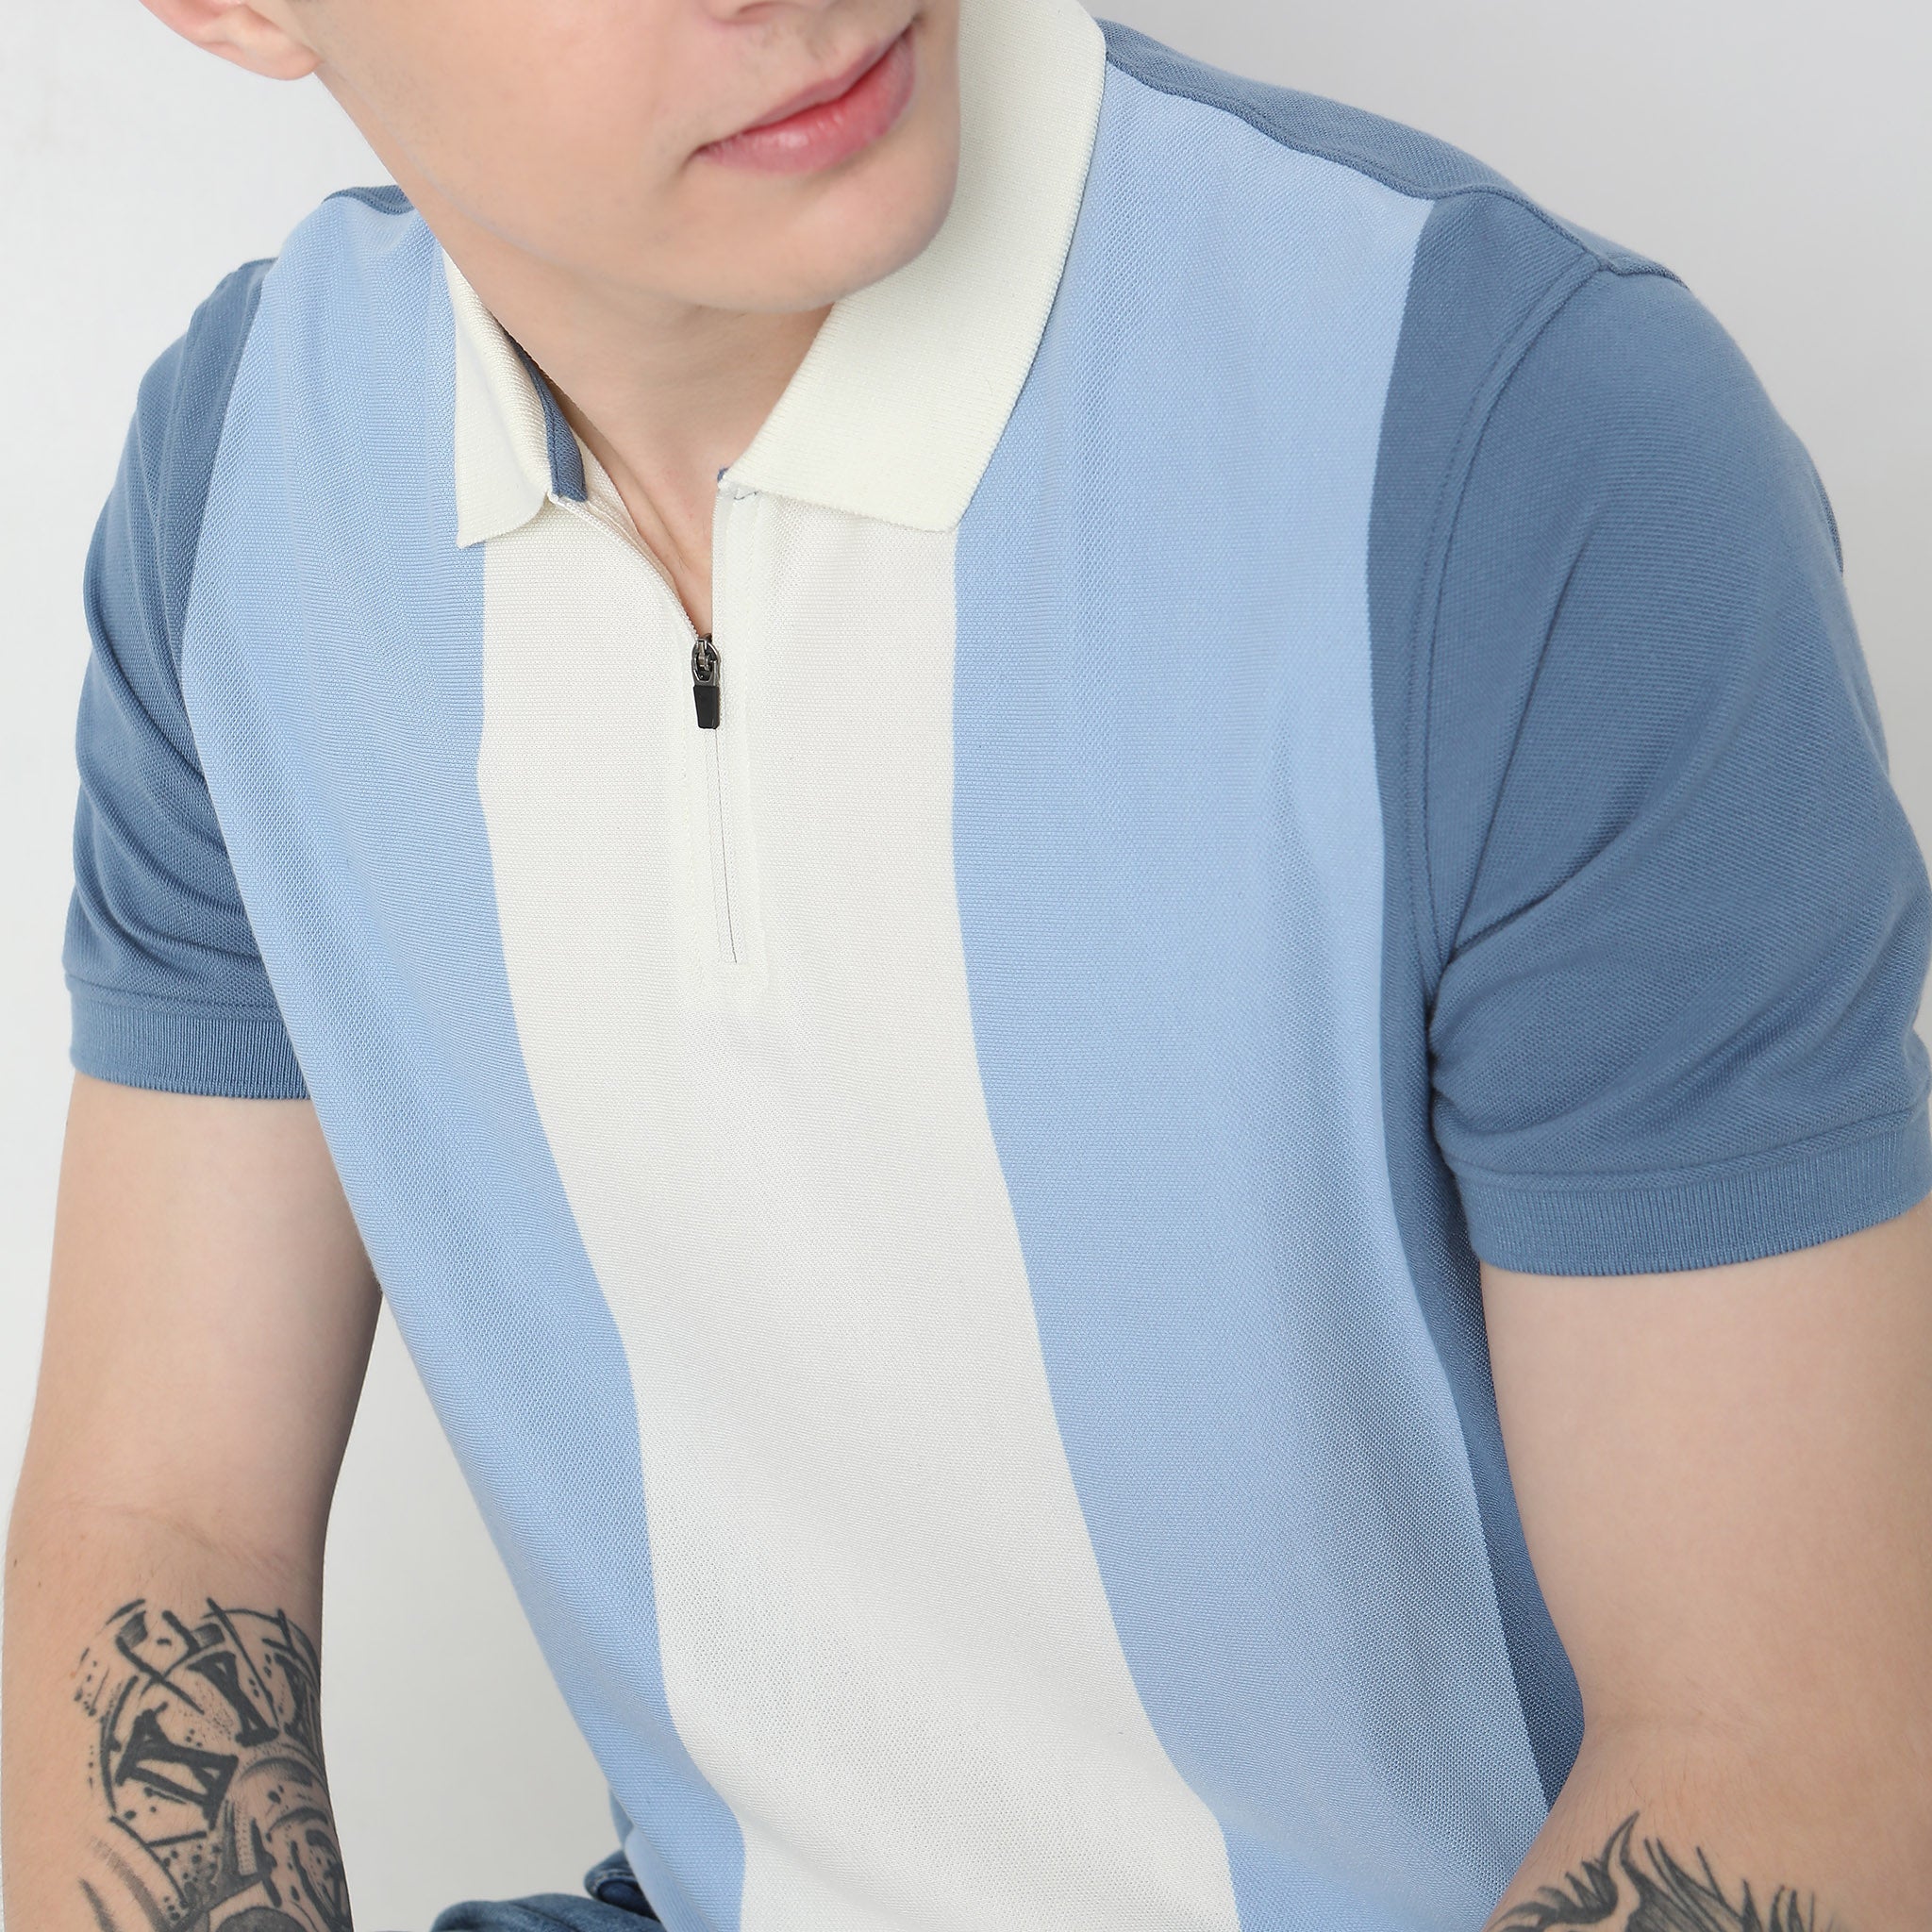 Regular Fit Striped Polo T-Shirt